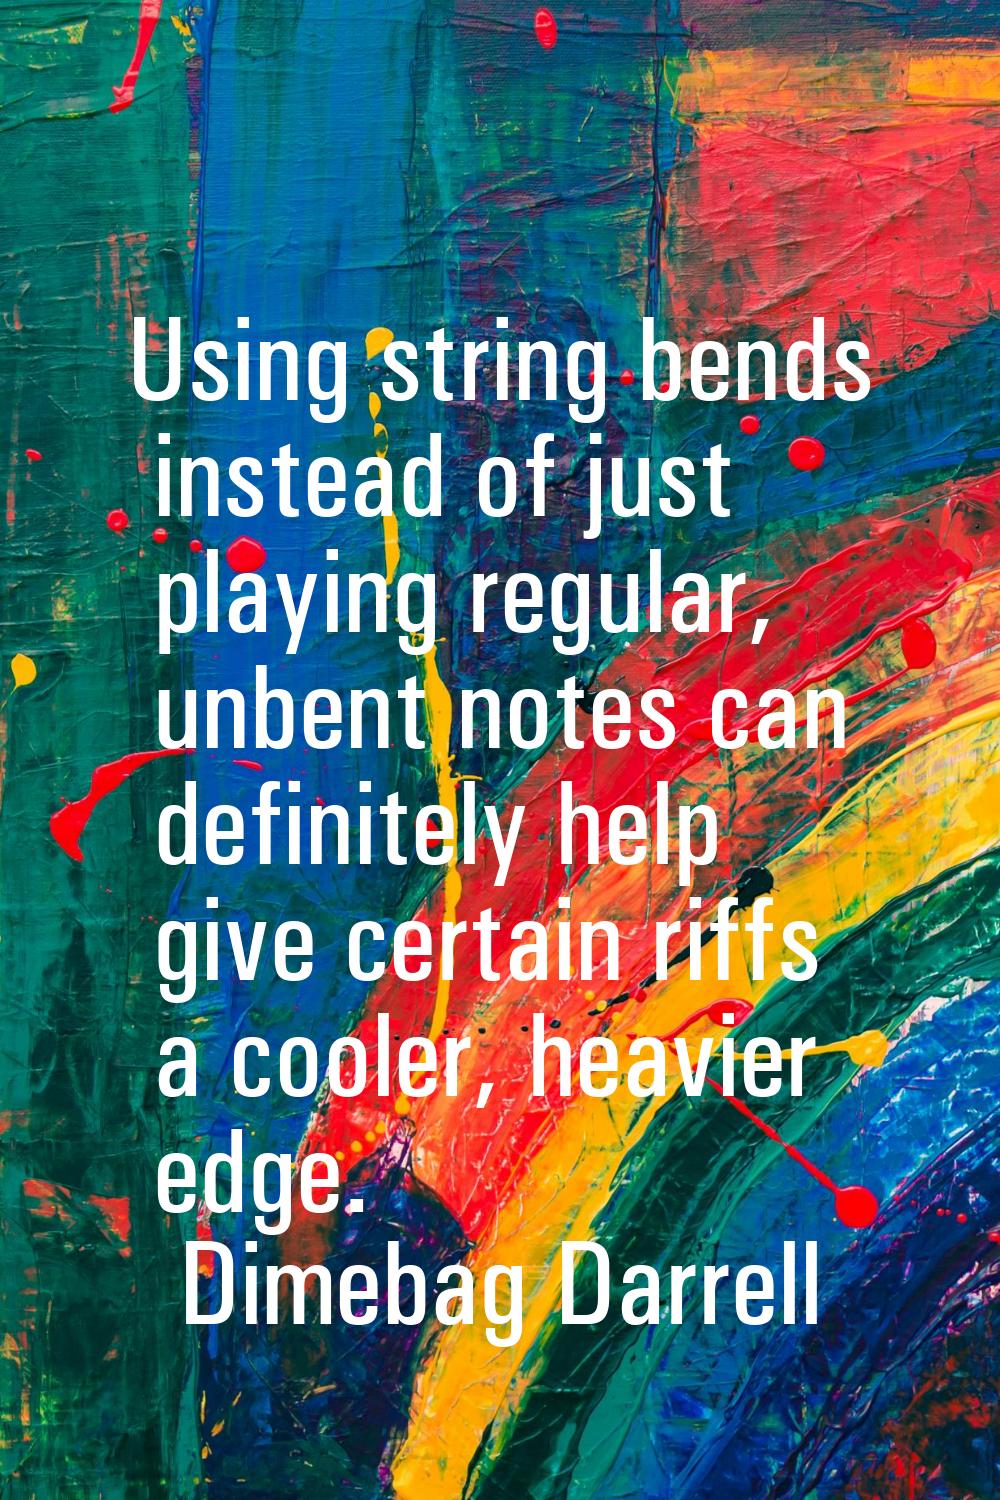 Using string bends instead of just playing regular, unbent notes can definitely help give certain r